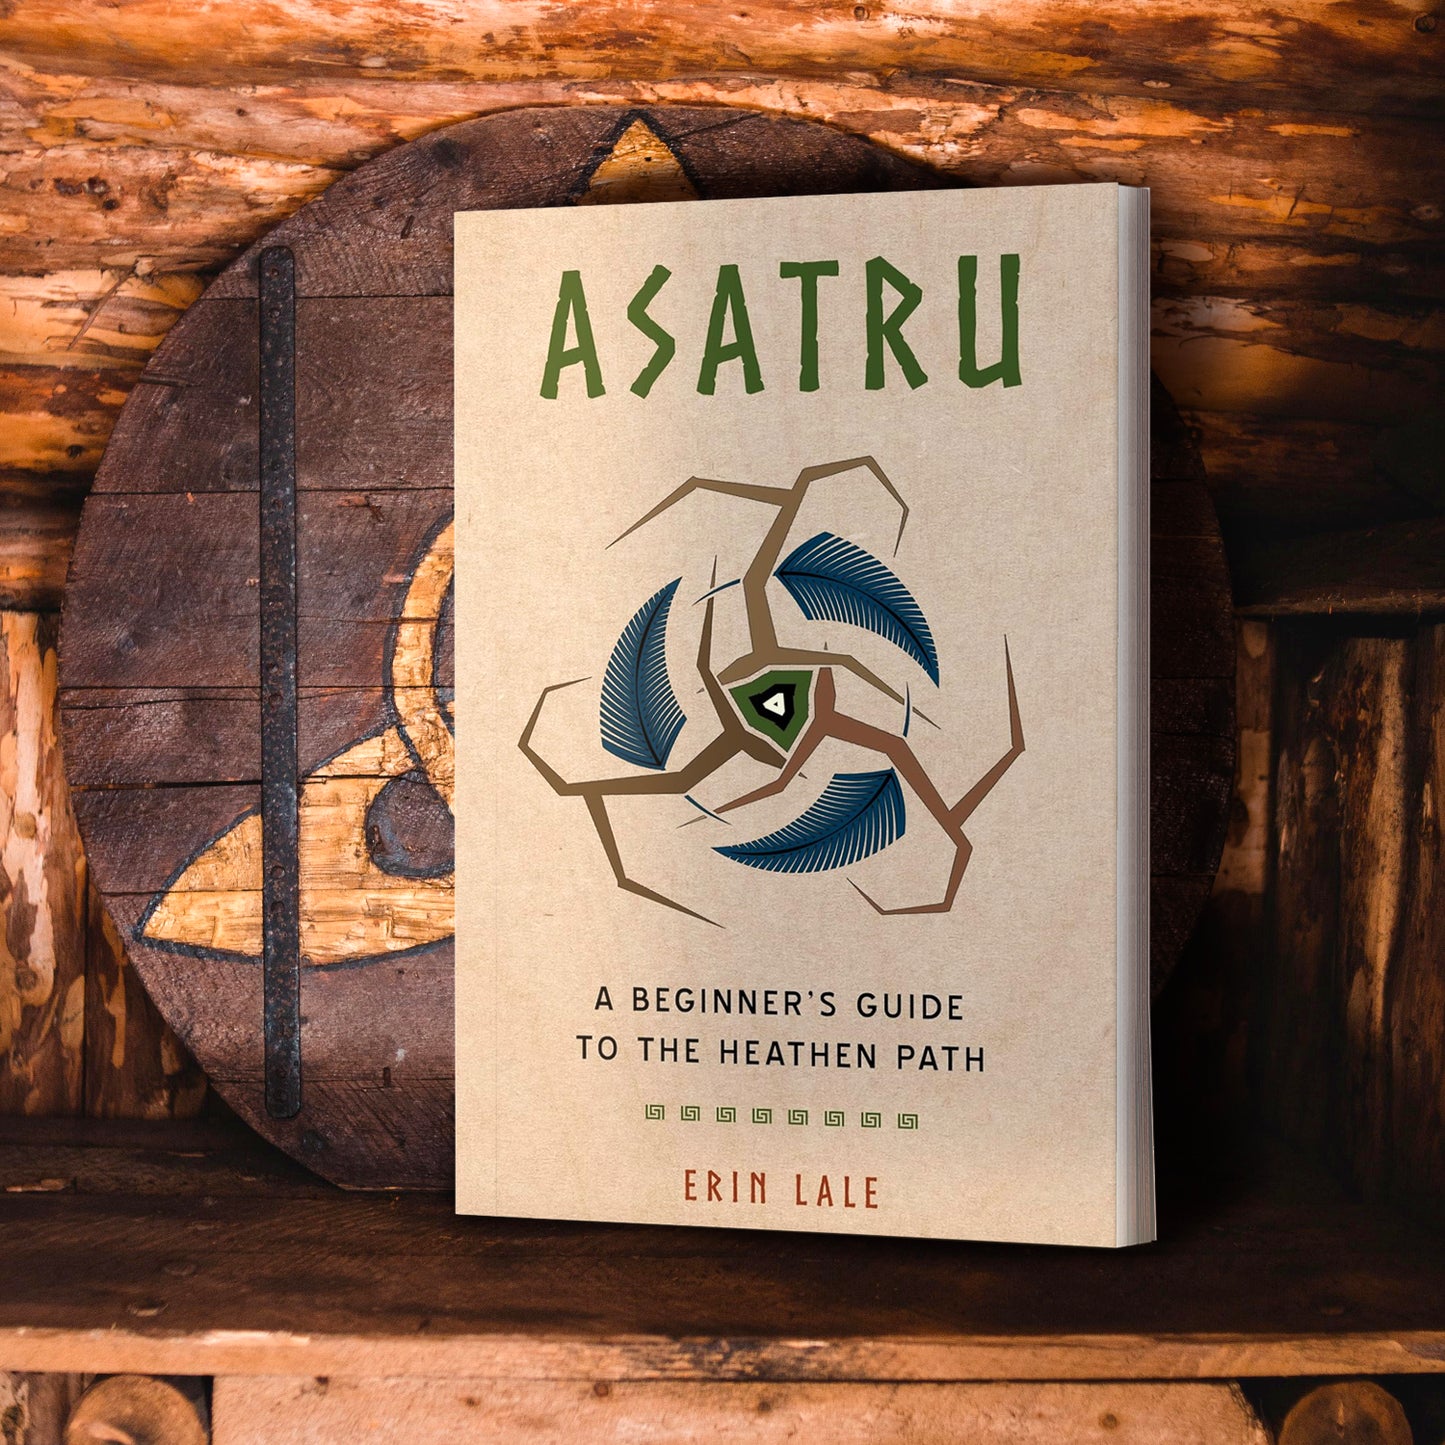 A light brown book on a wooden shelf.. At the top of the cover is green text that says Asatru. Below the title is a brown symbol reselbling three tree branches, with a blue feather inside each branch. The center of the symbol is greenm white, and black. Under the symbol is black text saying A beginner's guide to the heathen path. Behind the book is a wooden shield with a norse rune.